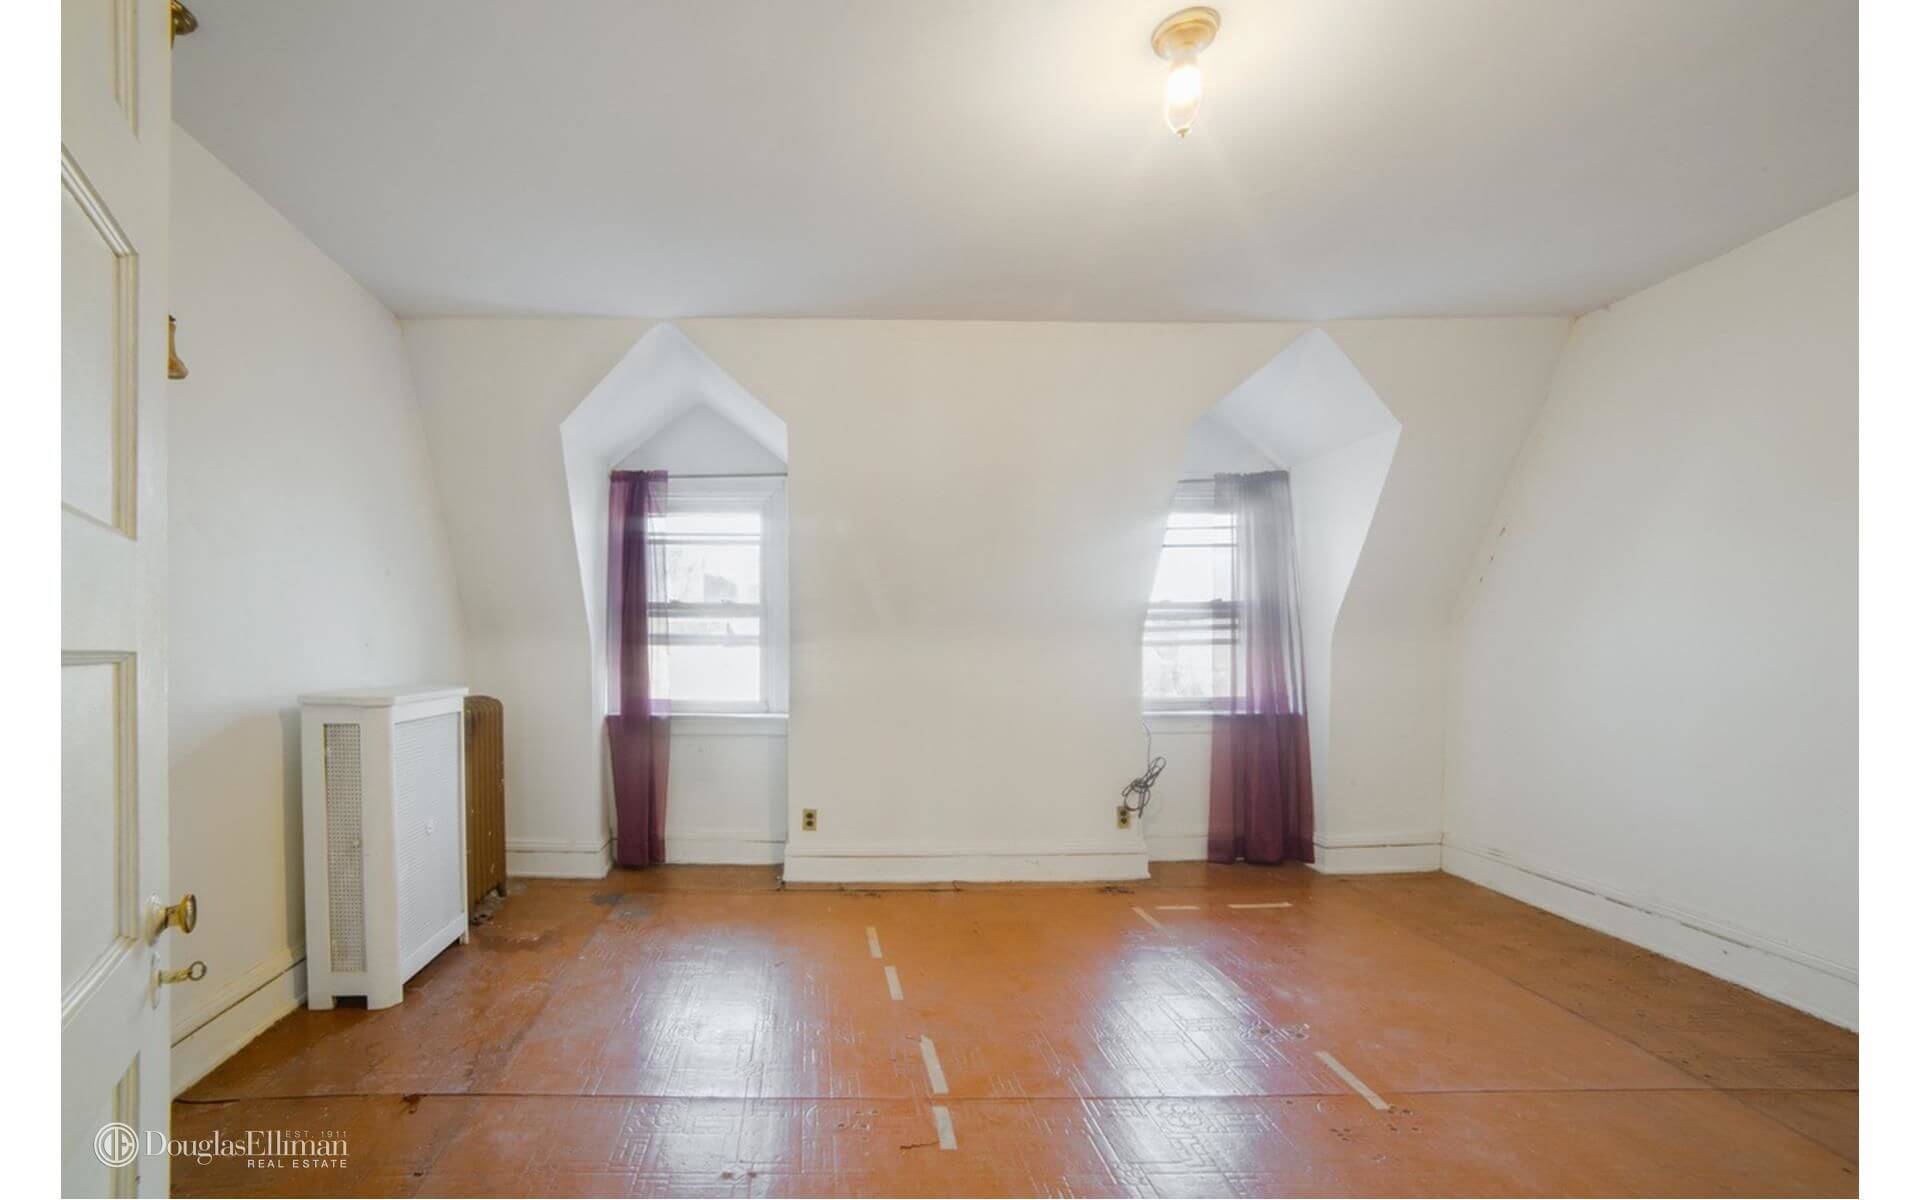 Brooklyn Homes for Sale in Prospect Lefferts Gardens at 112 Rutland Road